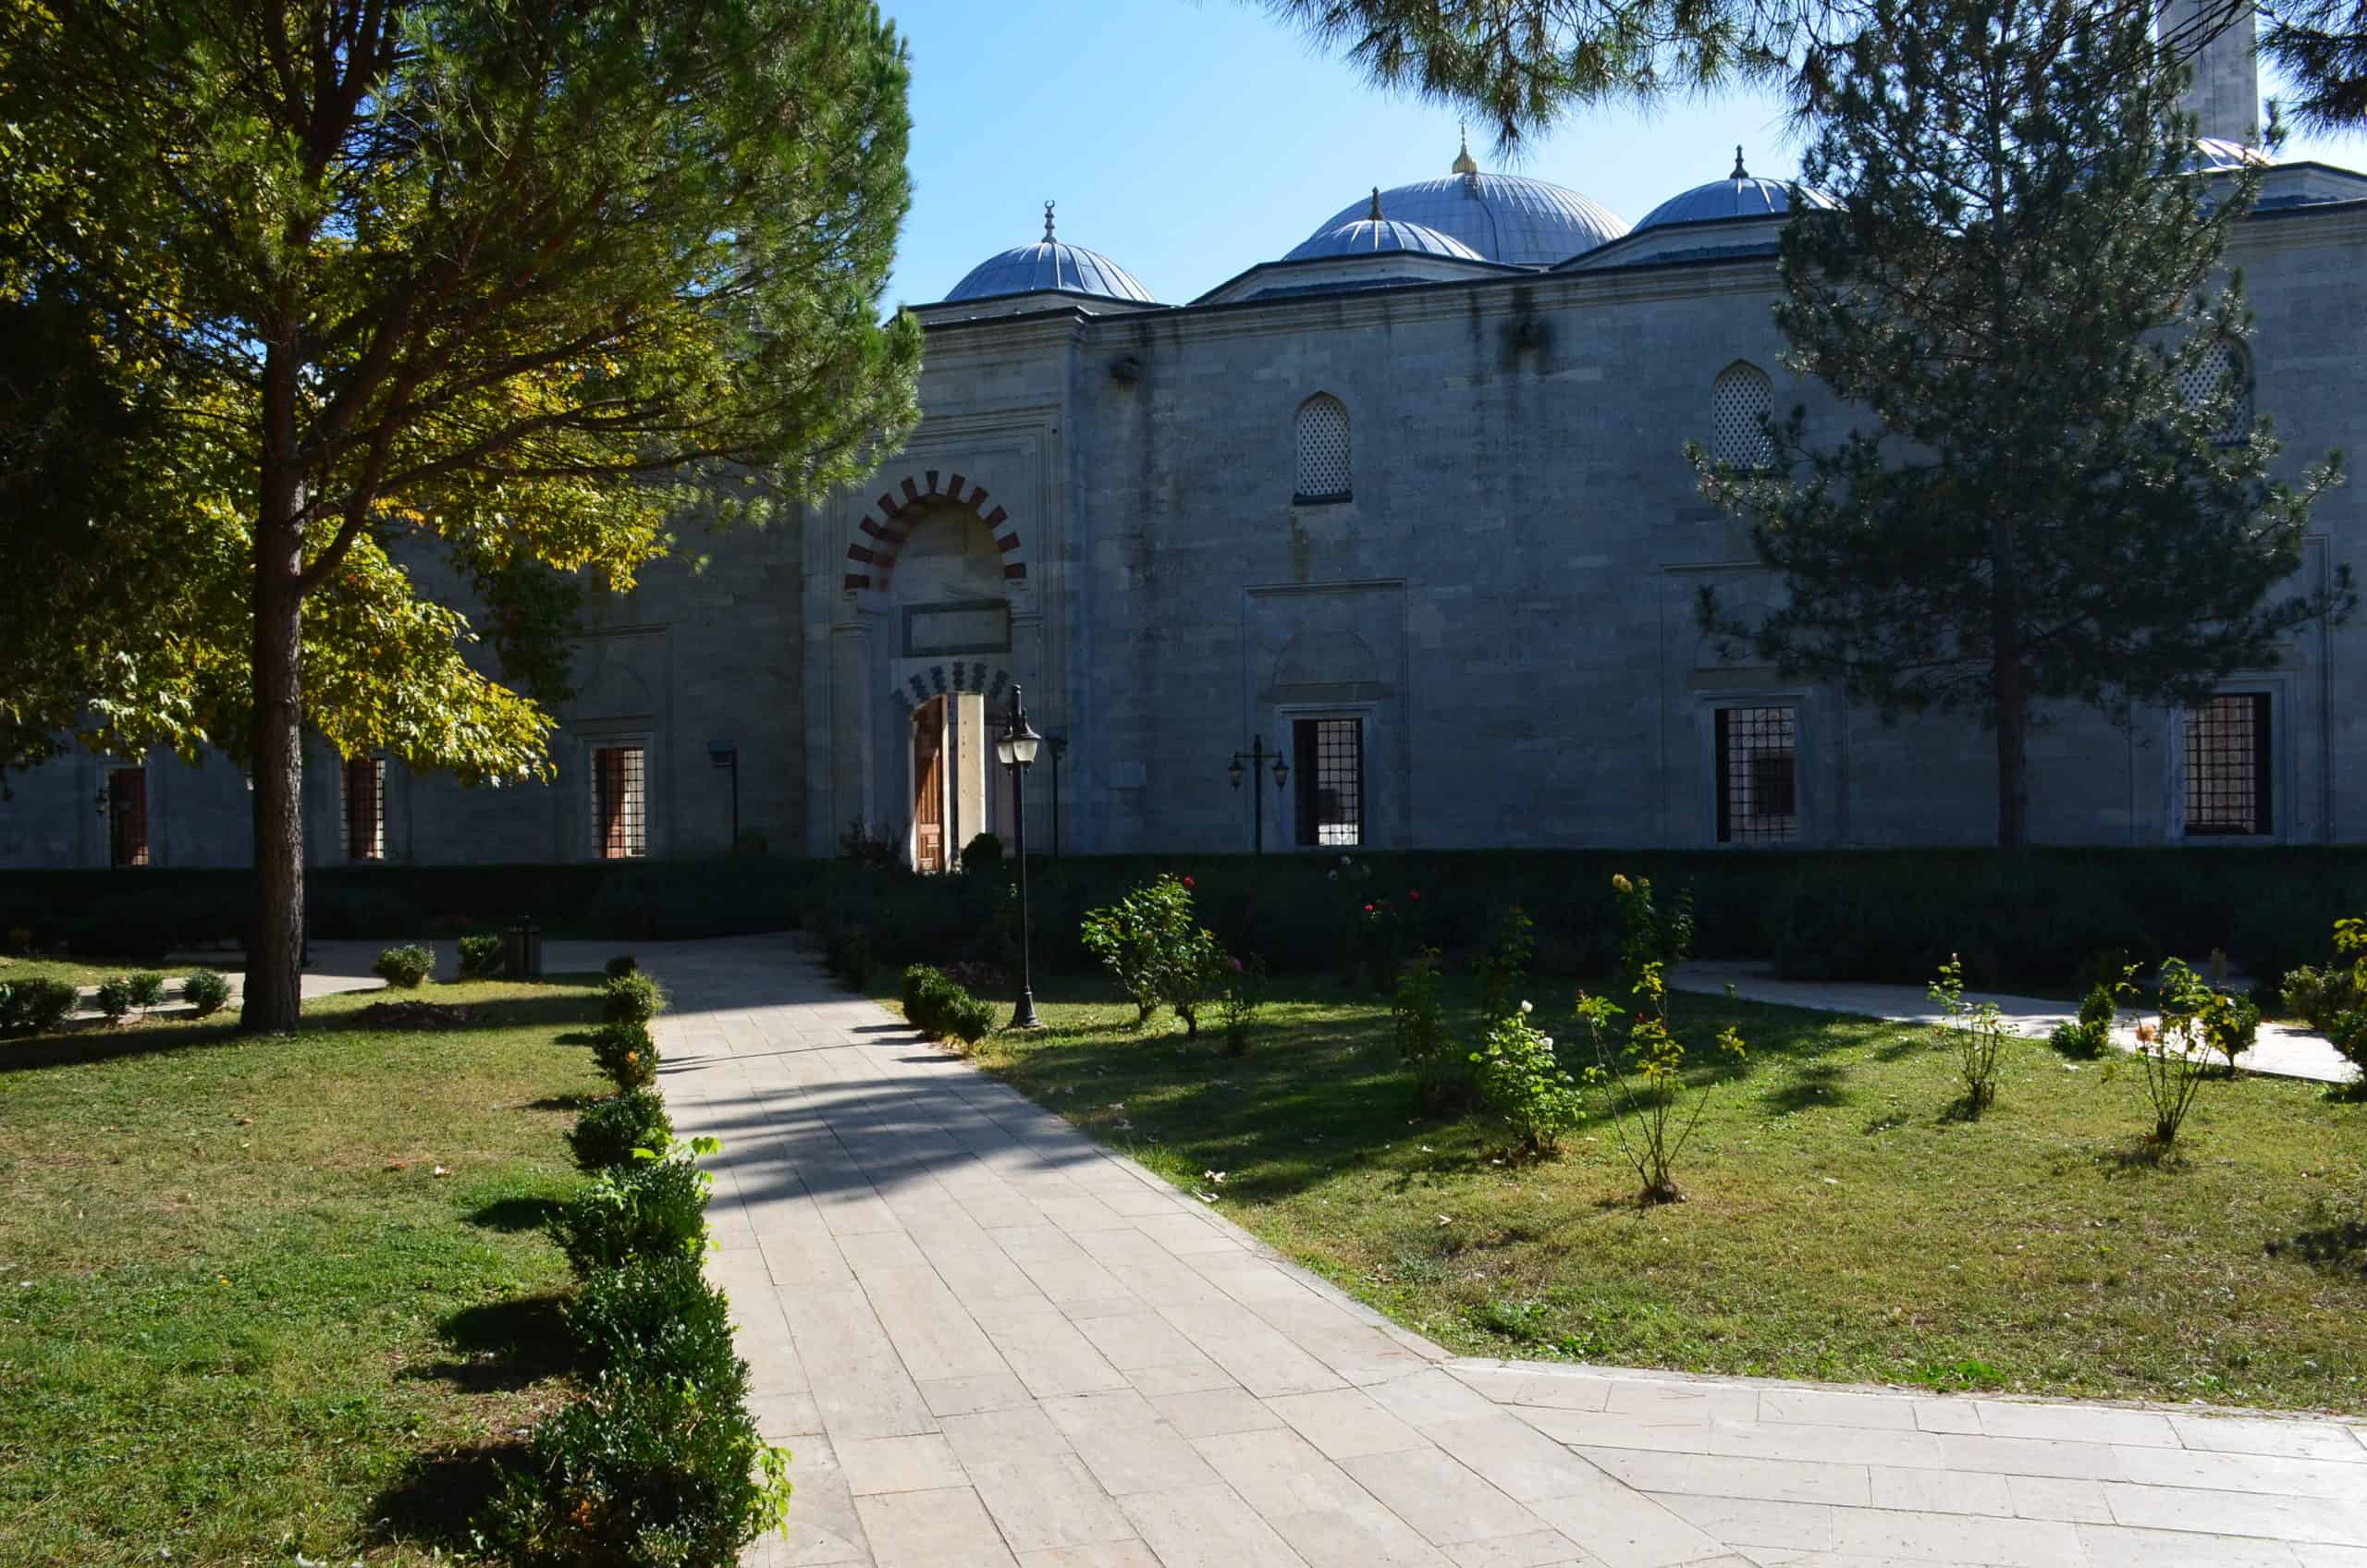 Outer courtyard at the Bayezid II Mosque